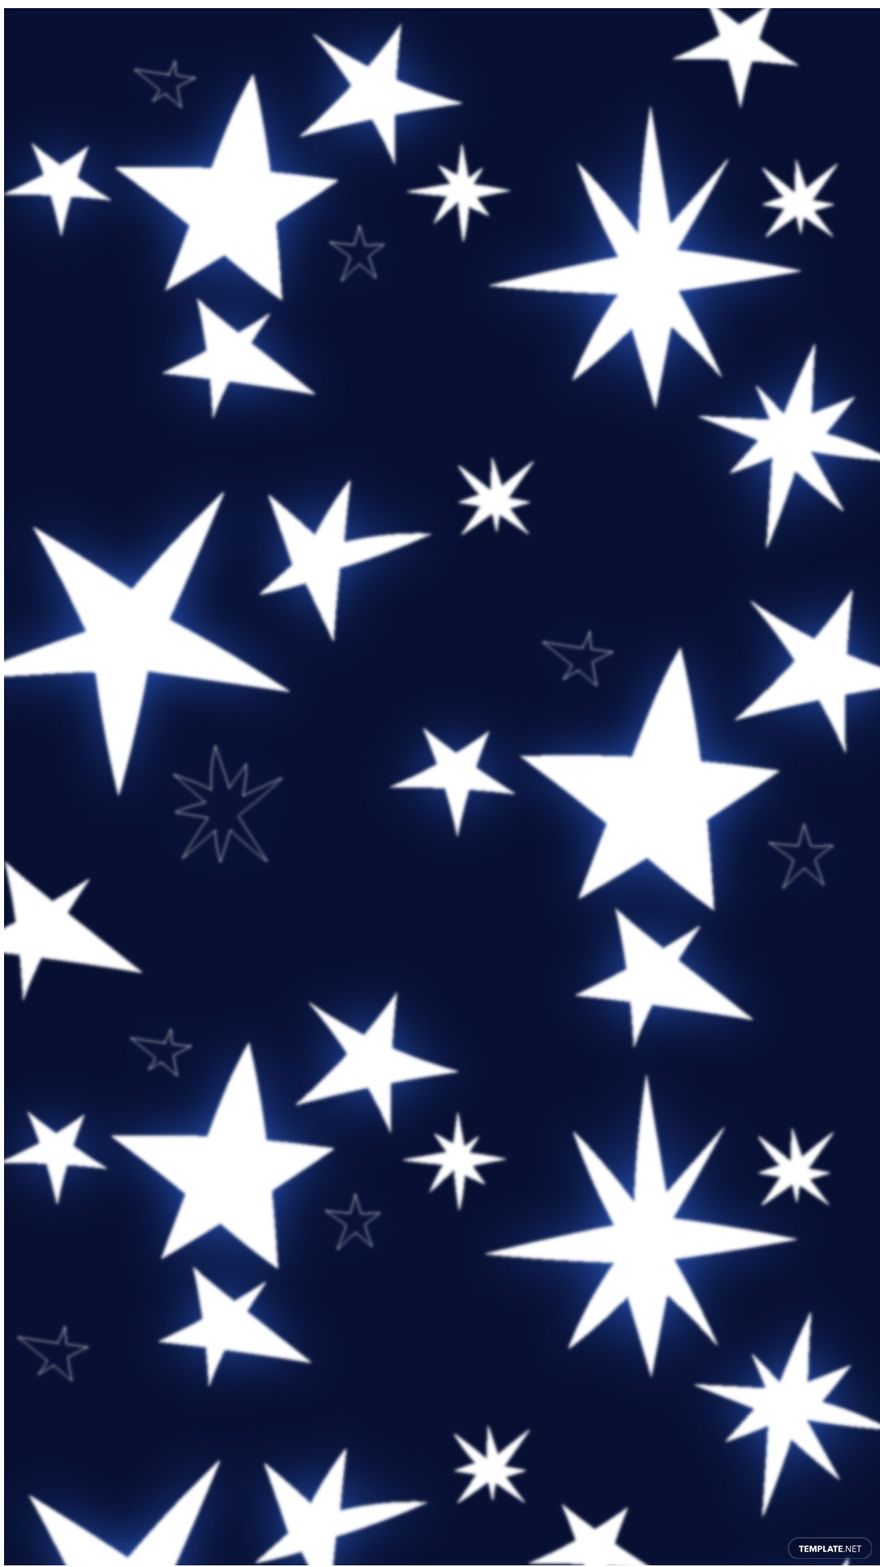 Star Background - Images, HD, Free, Download 